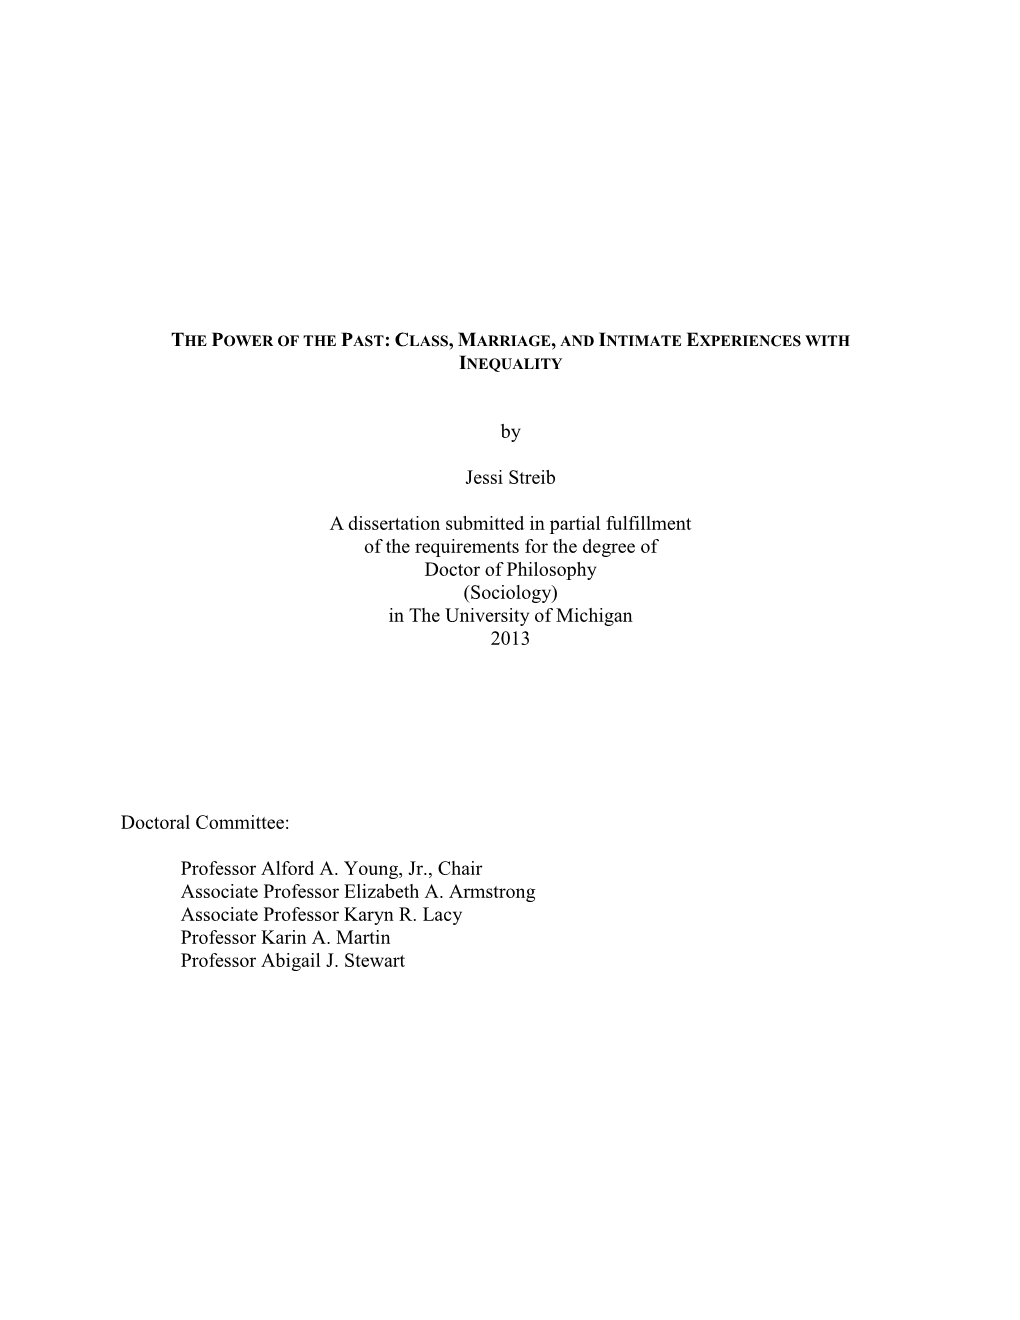 By Jessi Streib a Dissertation Submitted in Partial Fulfillment of The